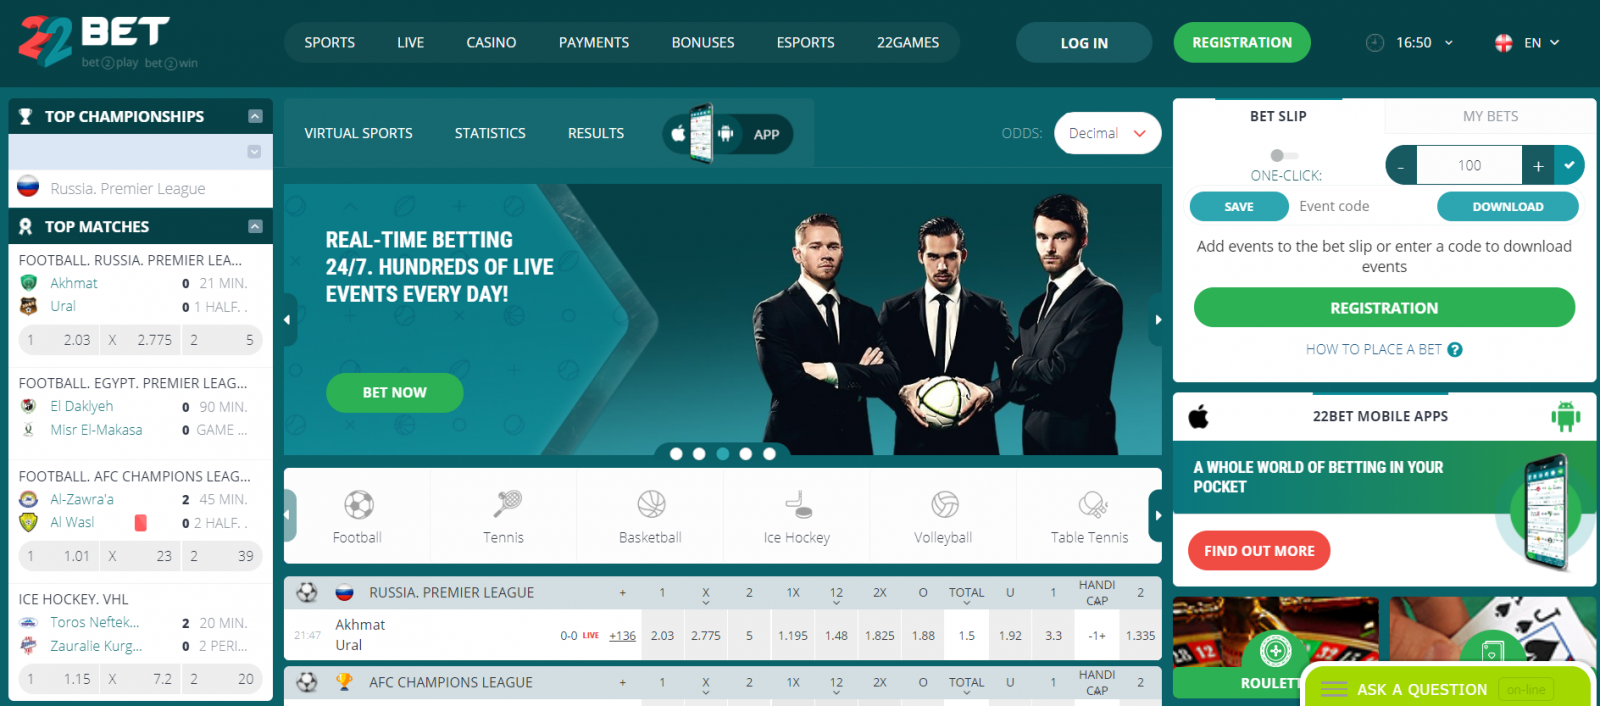 22bet betting company review